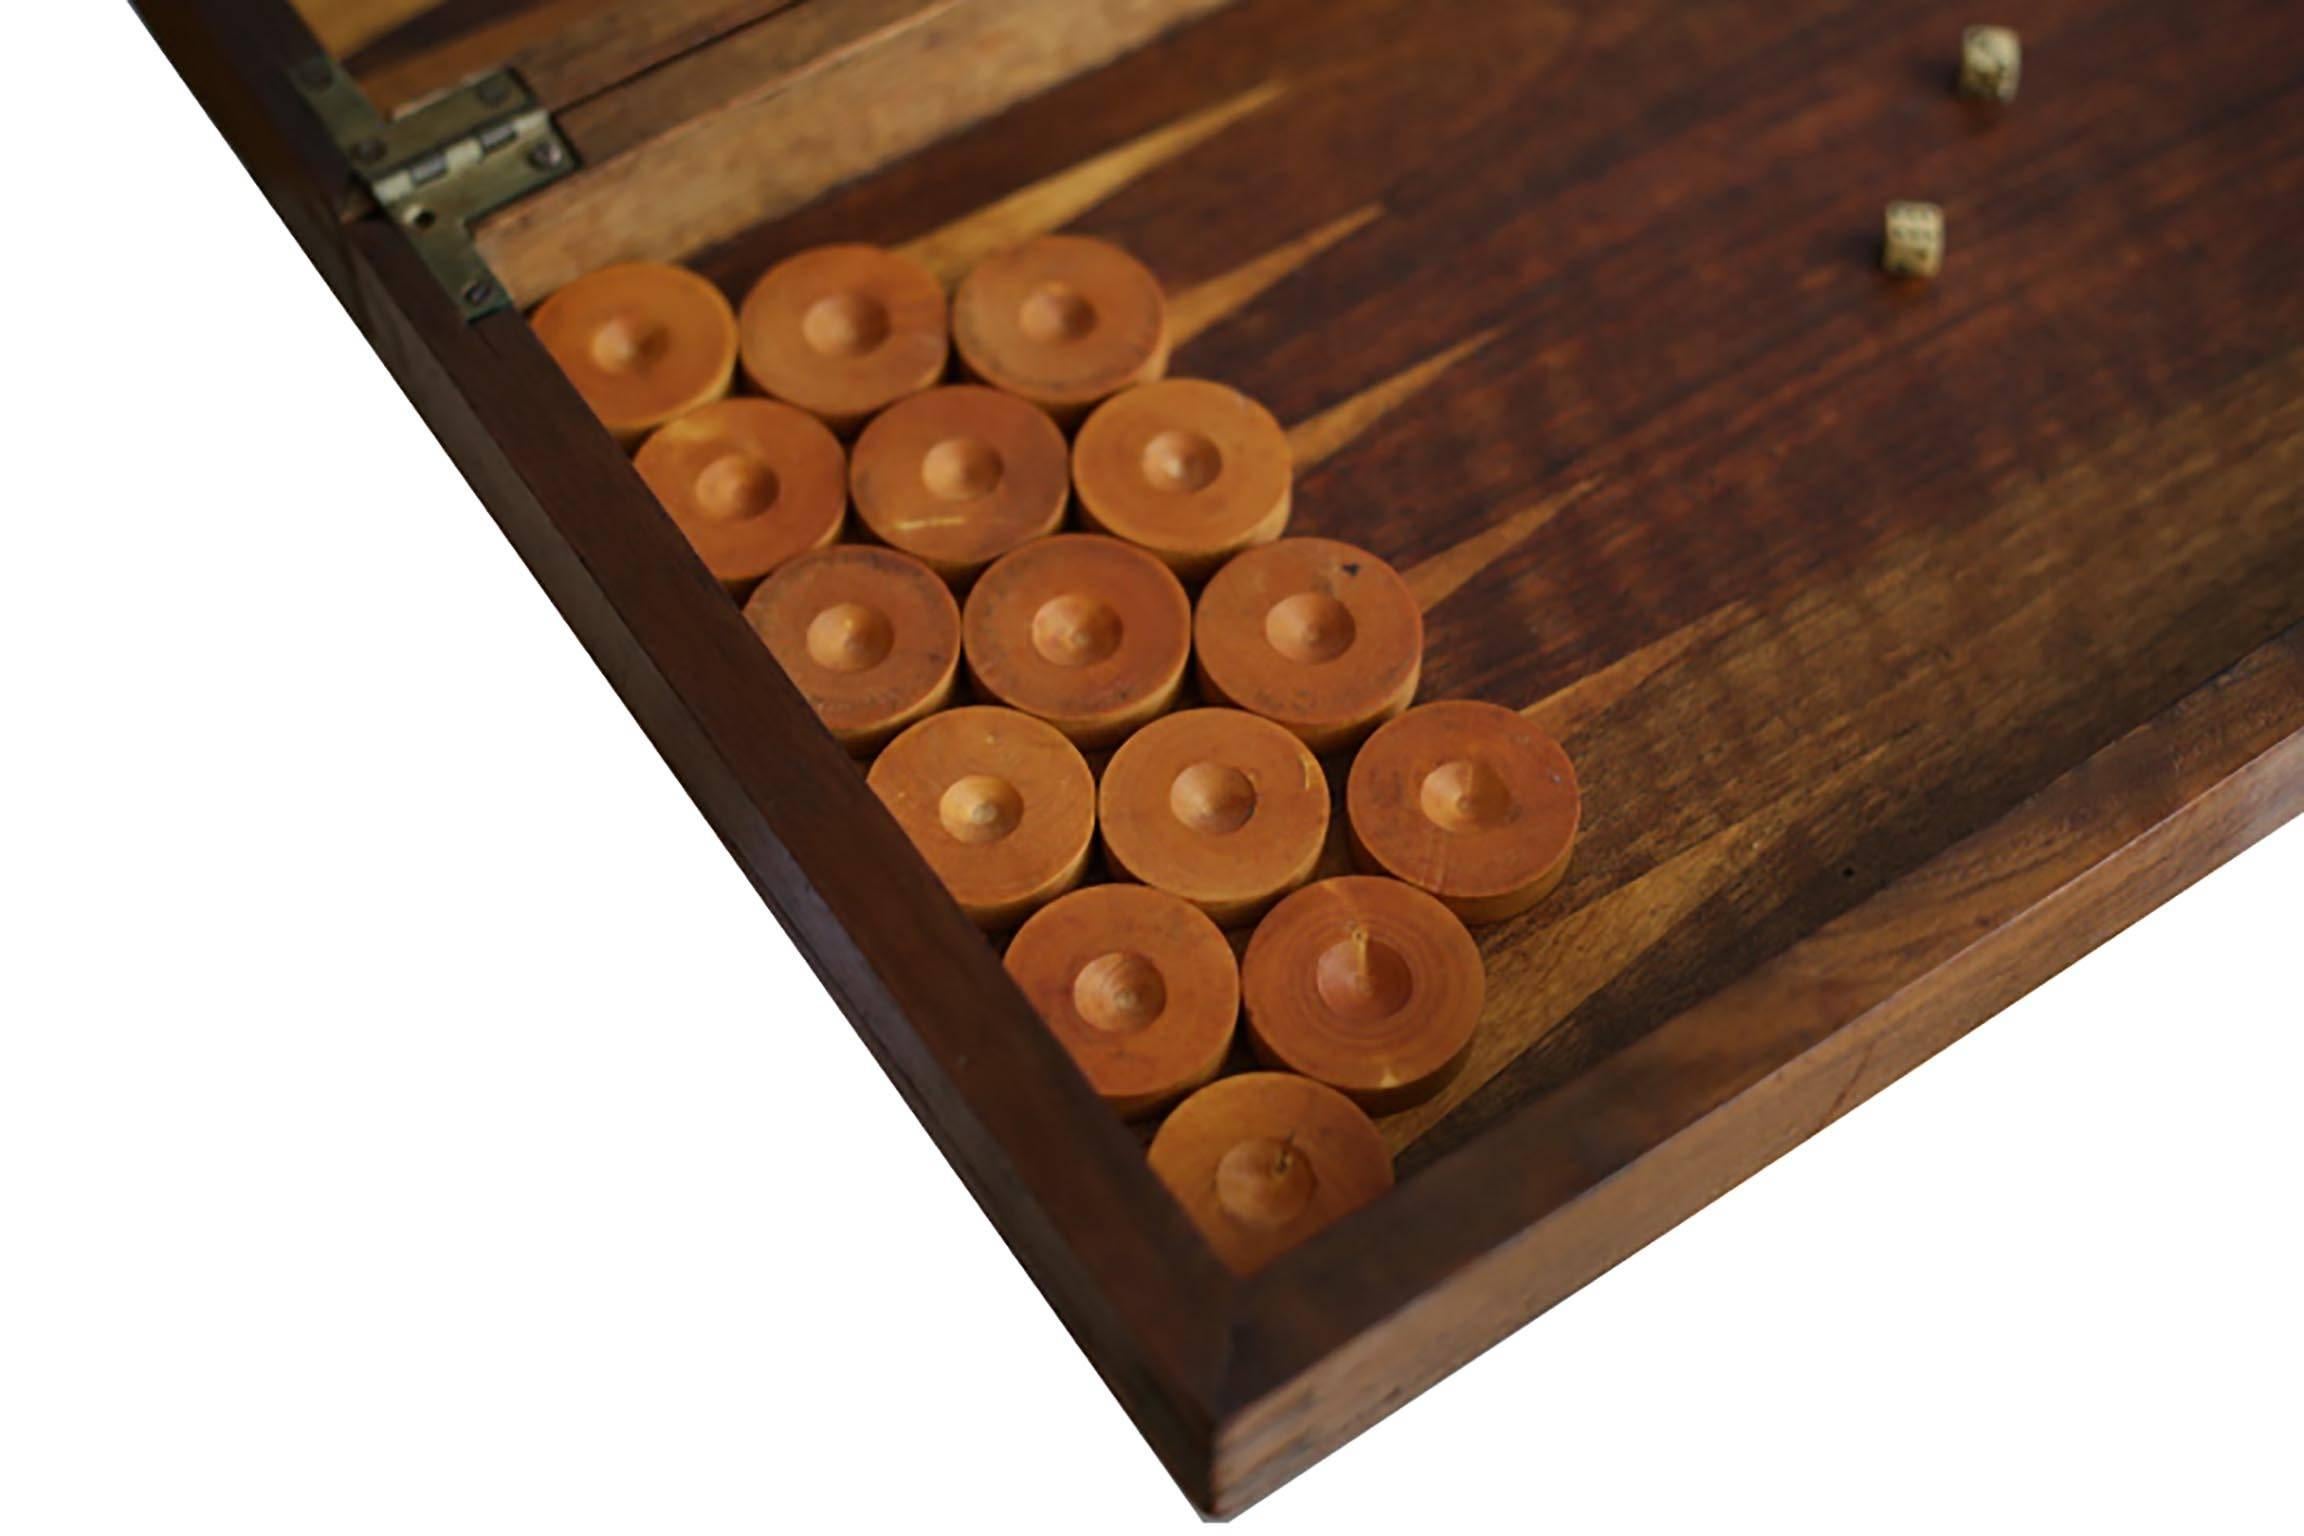 Lovely backgammon board with dovetail joints, wooden chips, and two bone dice. The chips are a complete set.